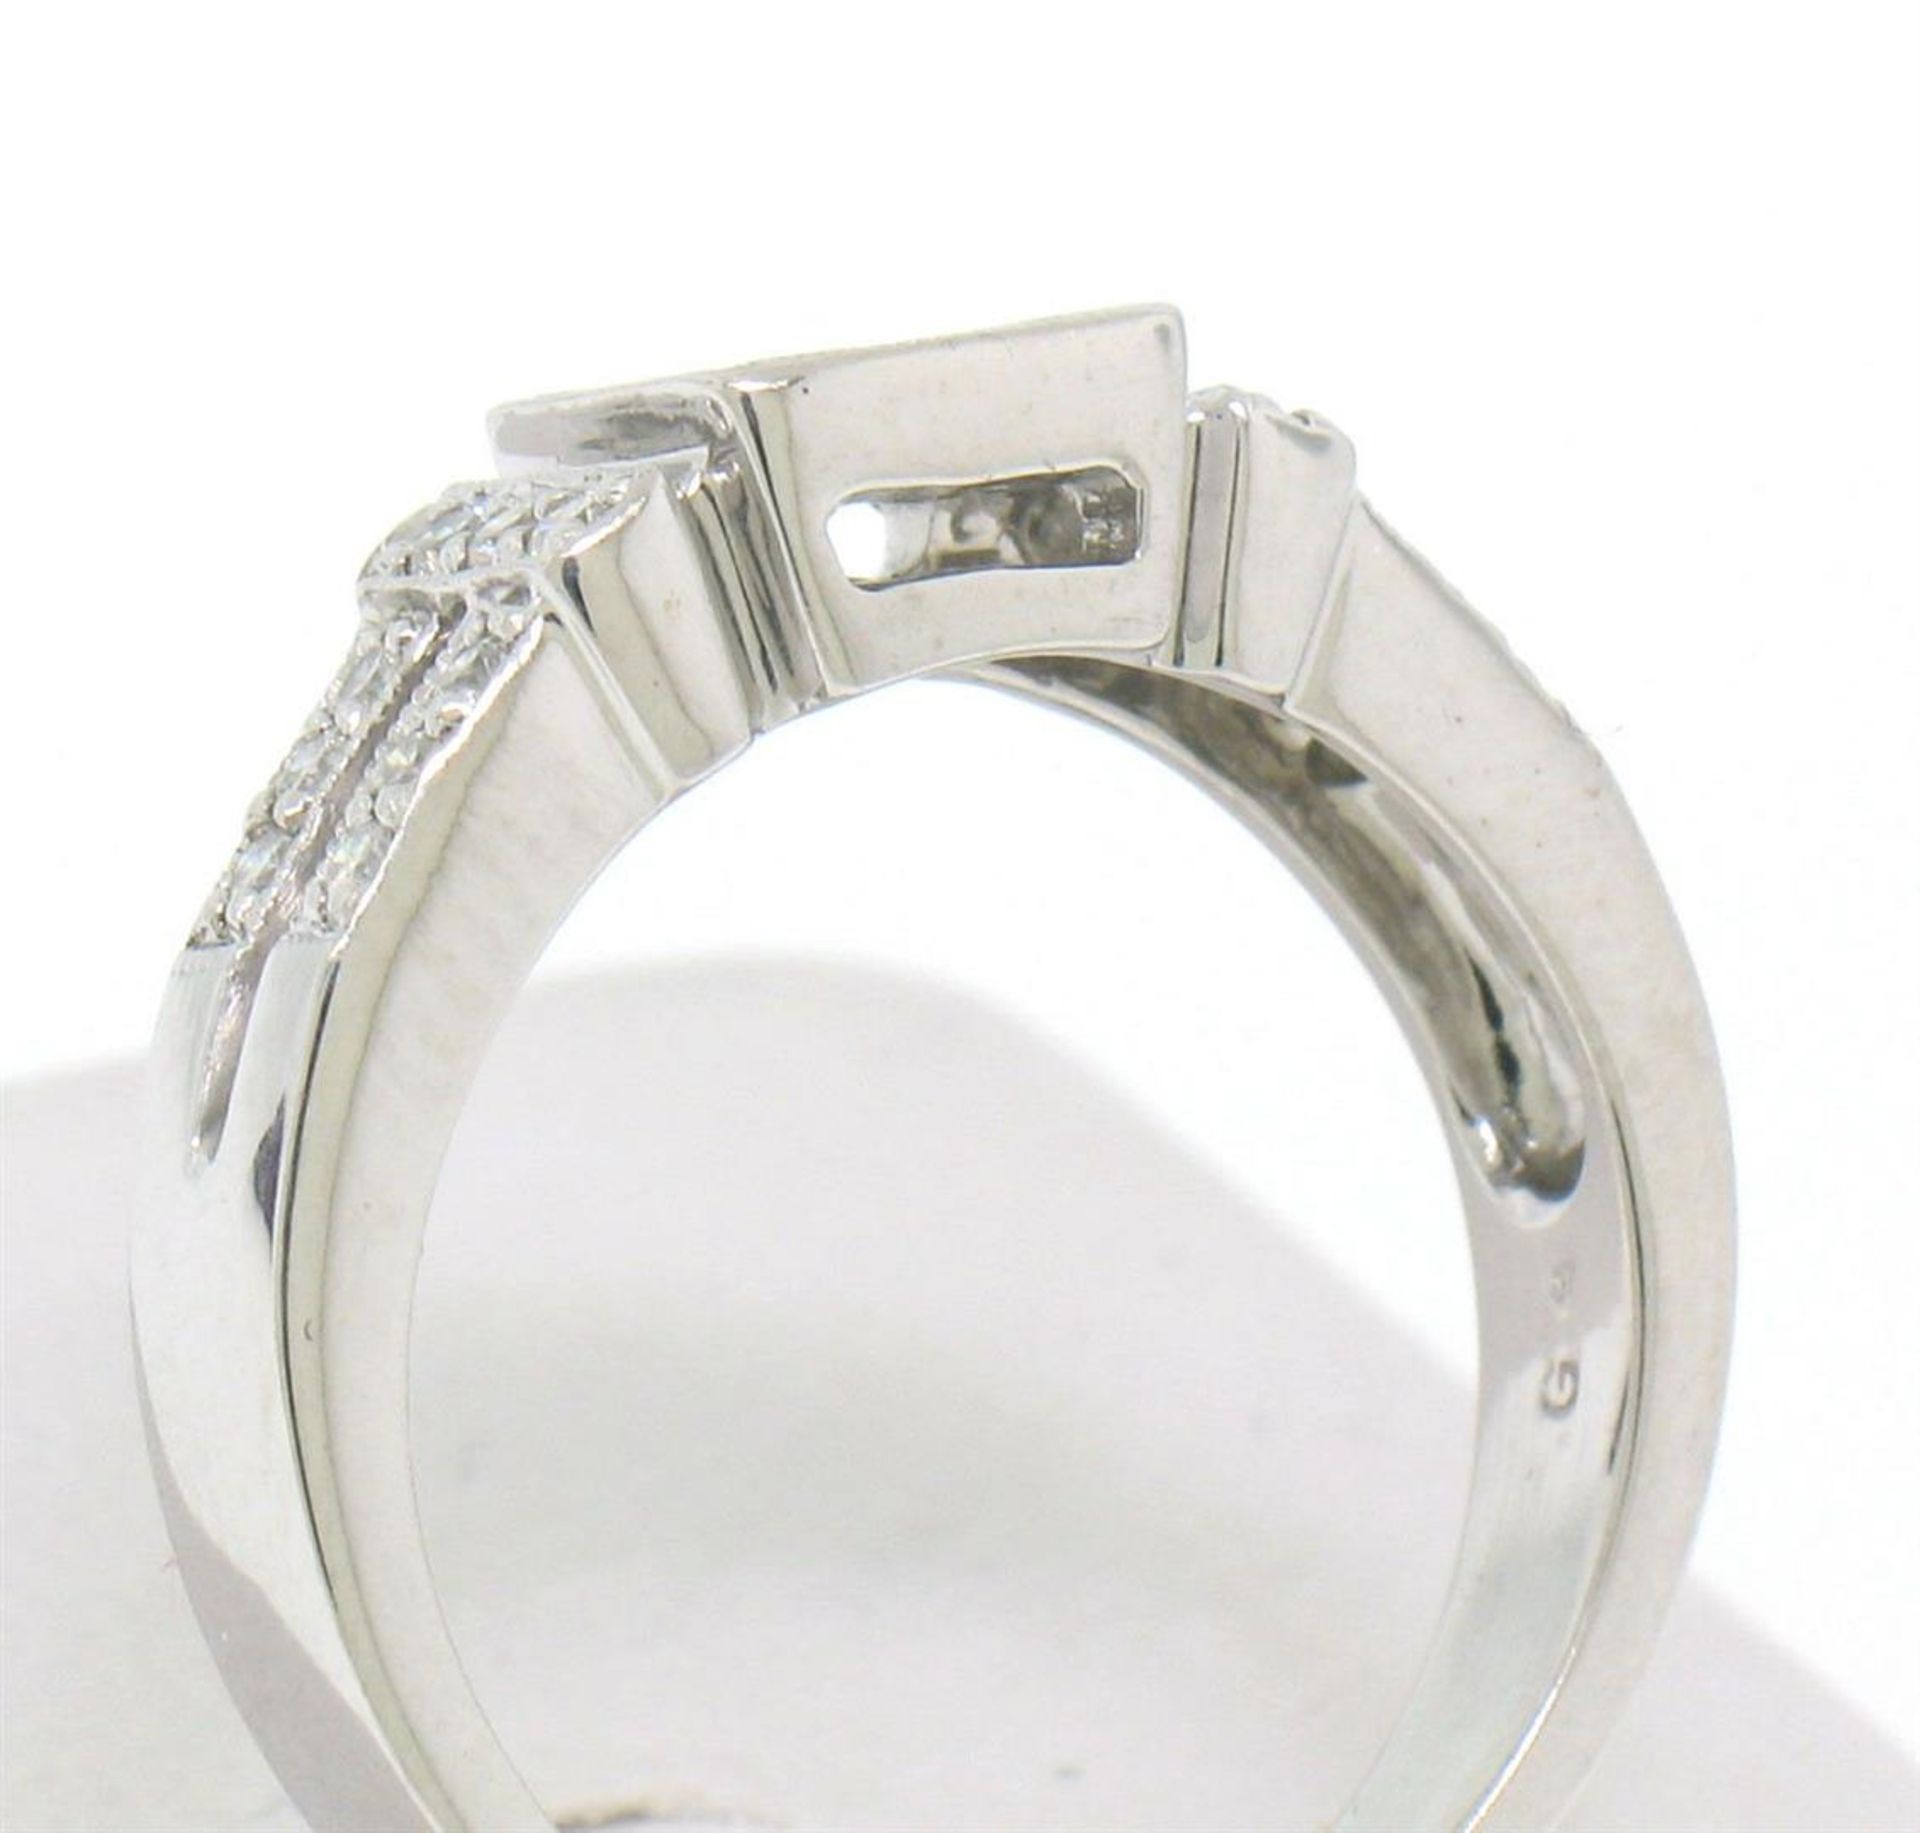 Modern 18k White Gold Princess & Pave Diamond Band Ring in Invisible Setting - Image 5 of 6